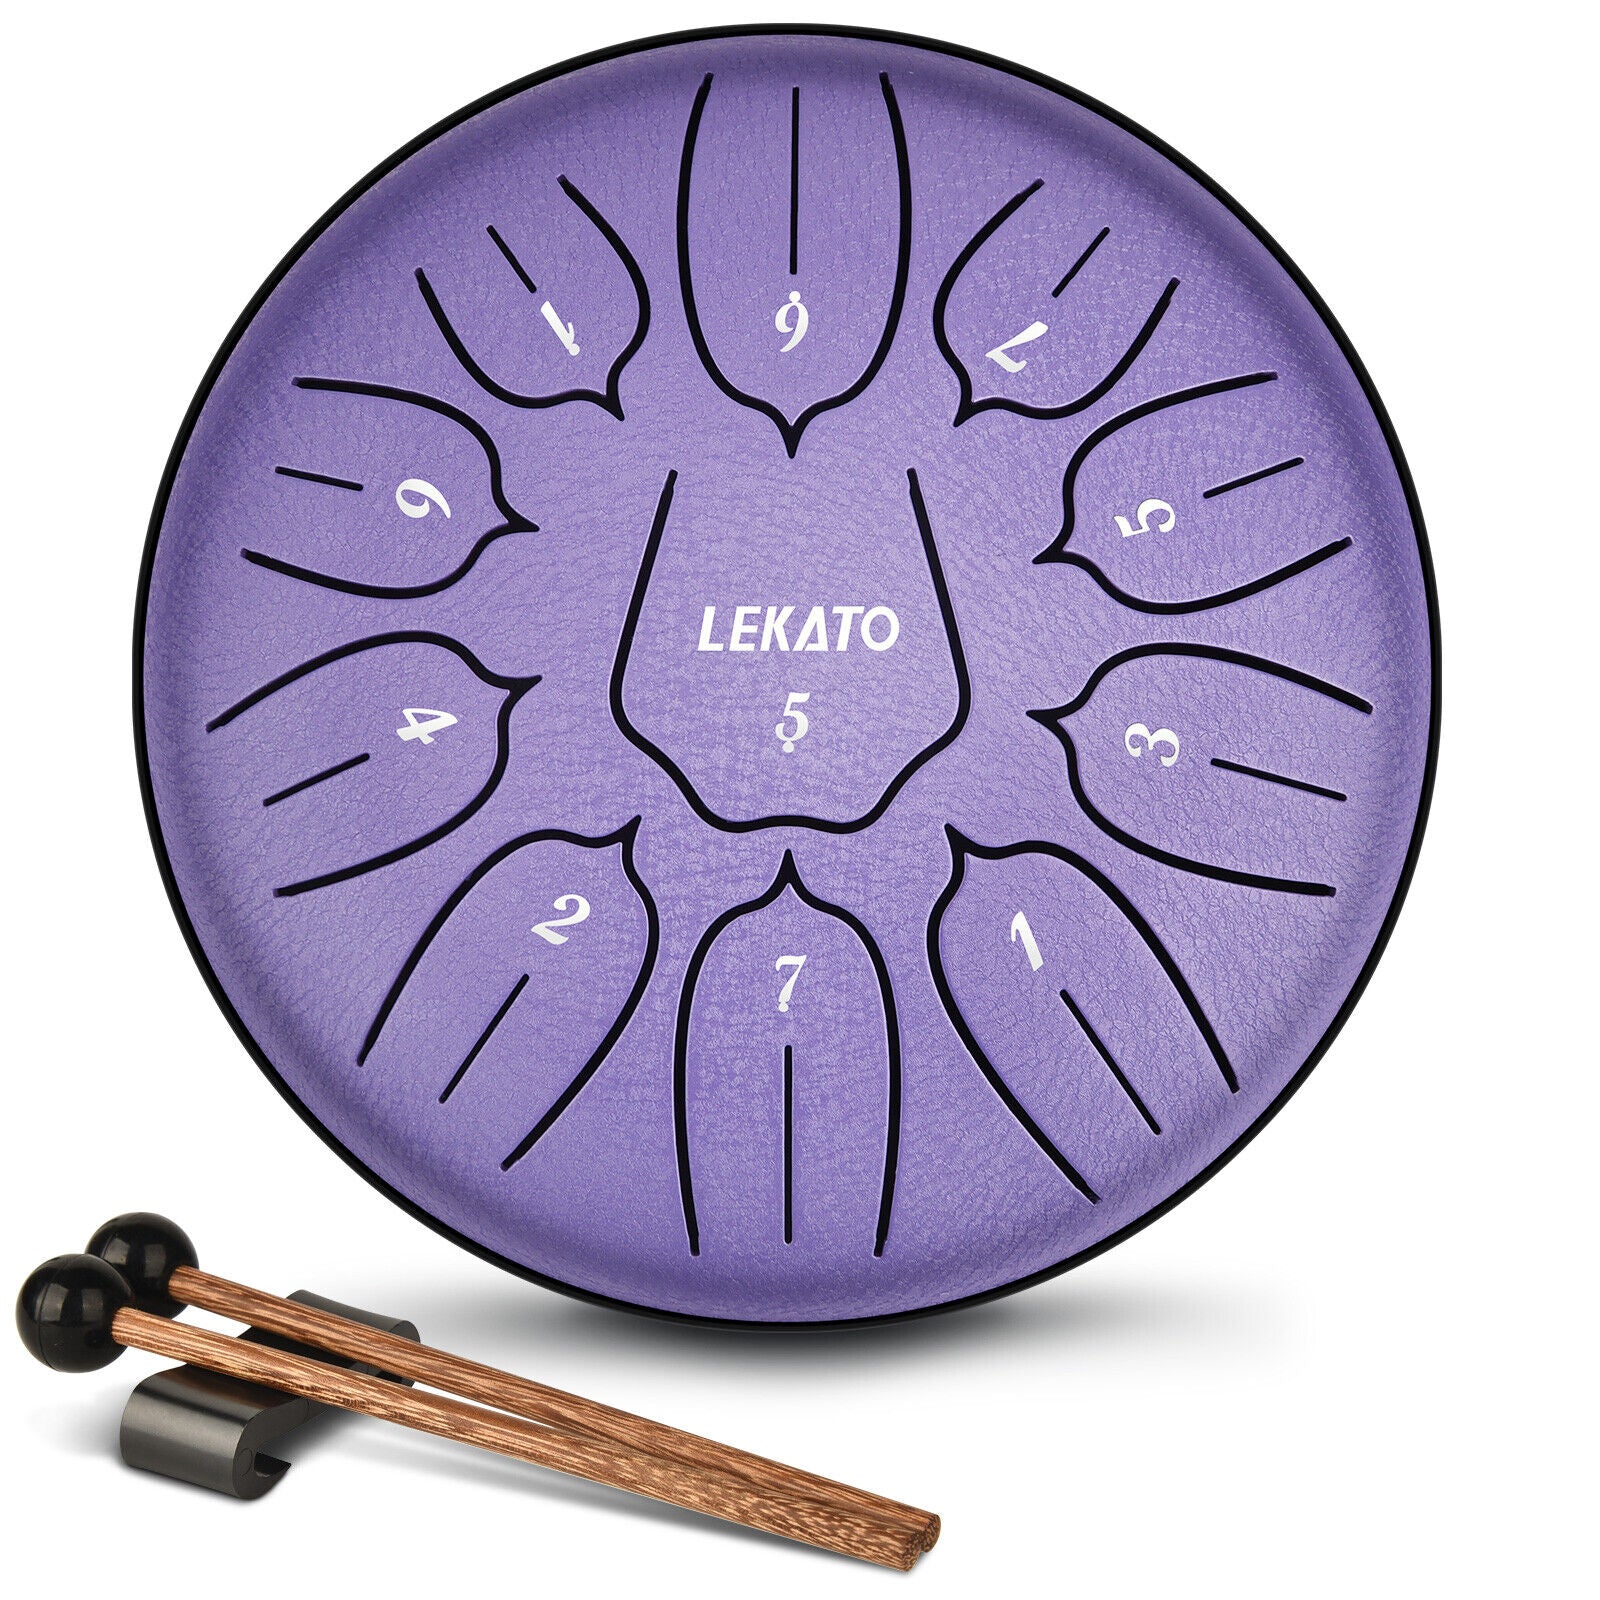 Buy wholesale Steel tongue drum HANDPAN children's percussion drum 6 inches  8 notes - Children's percussion musical instrument - original girl boy gift